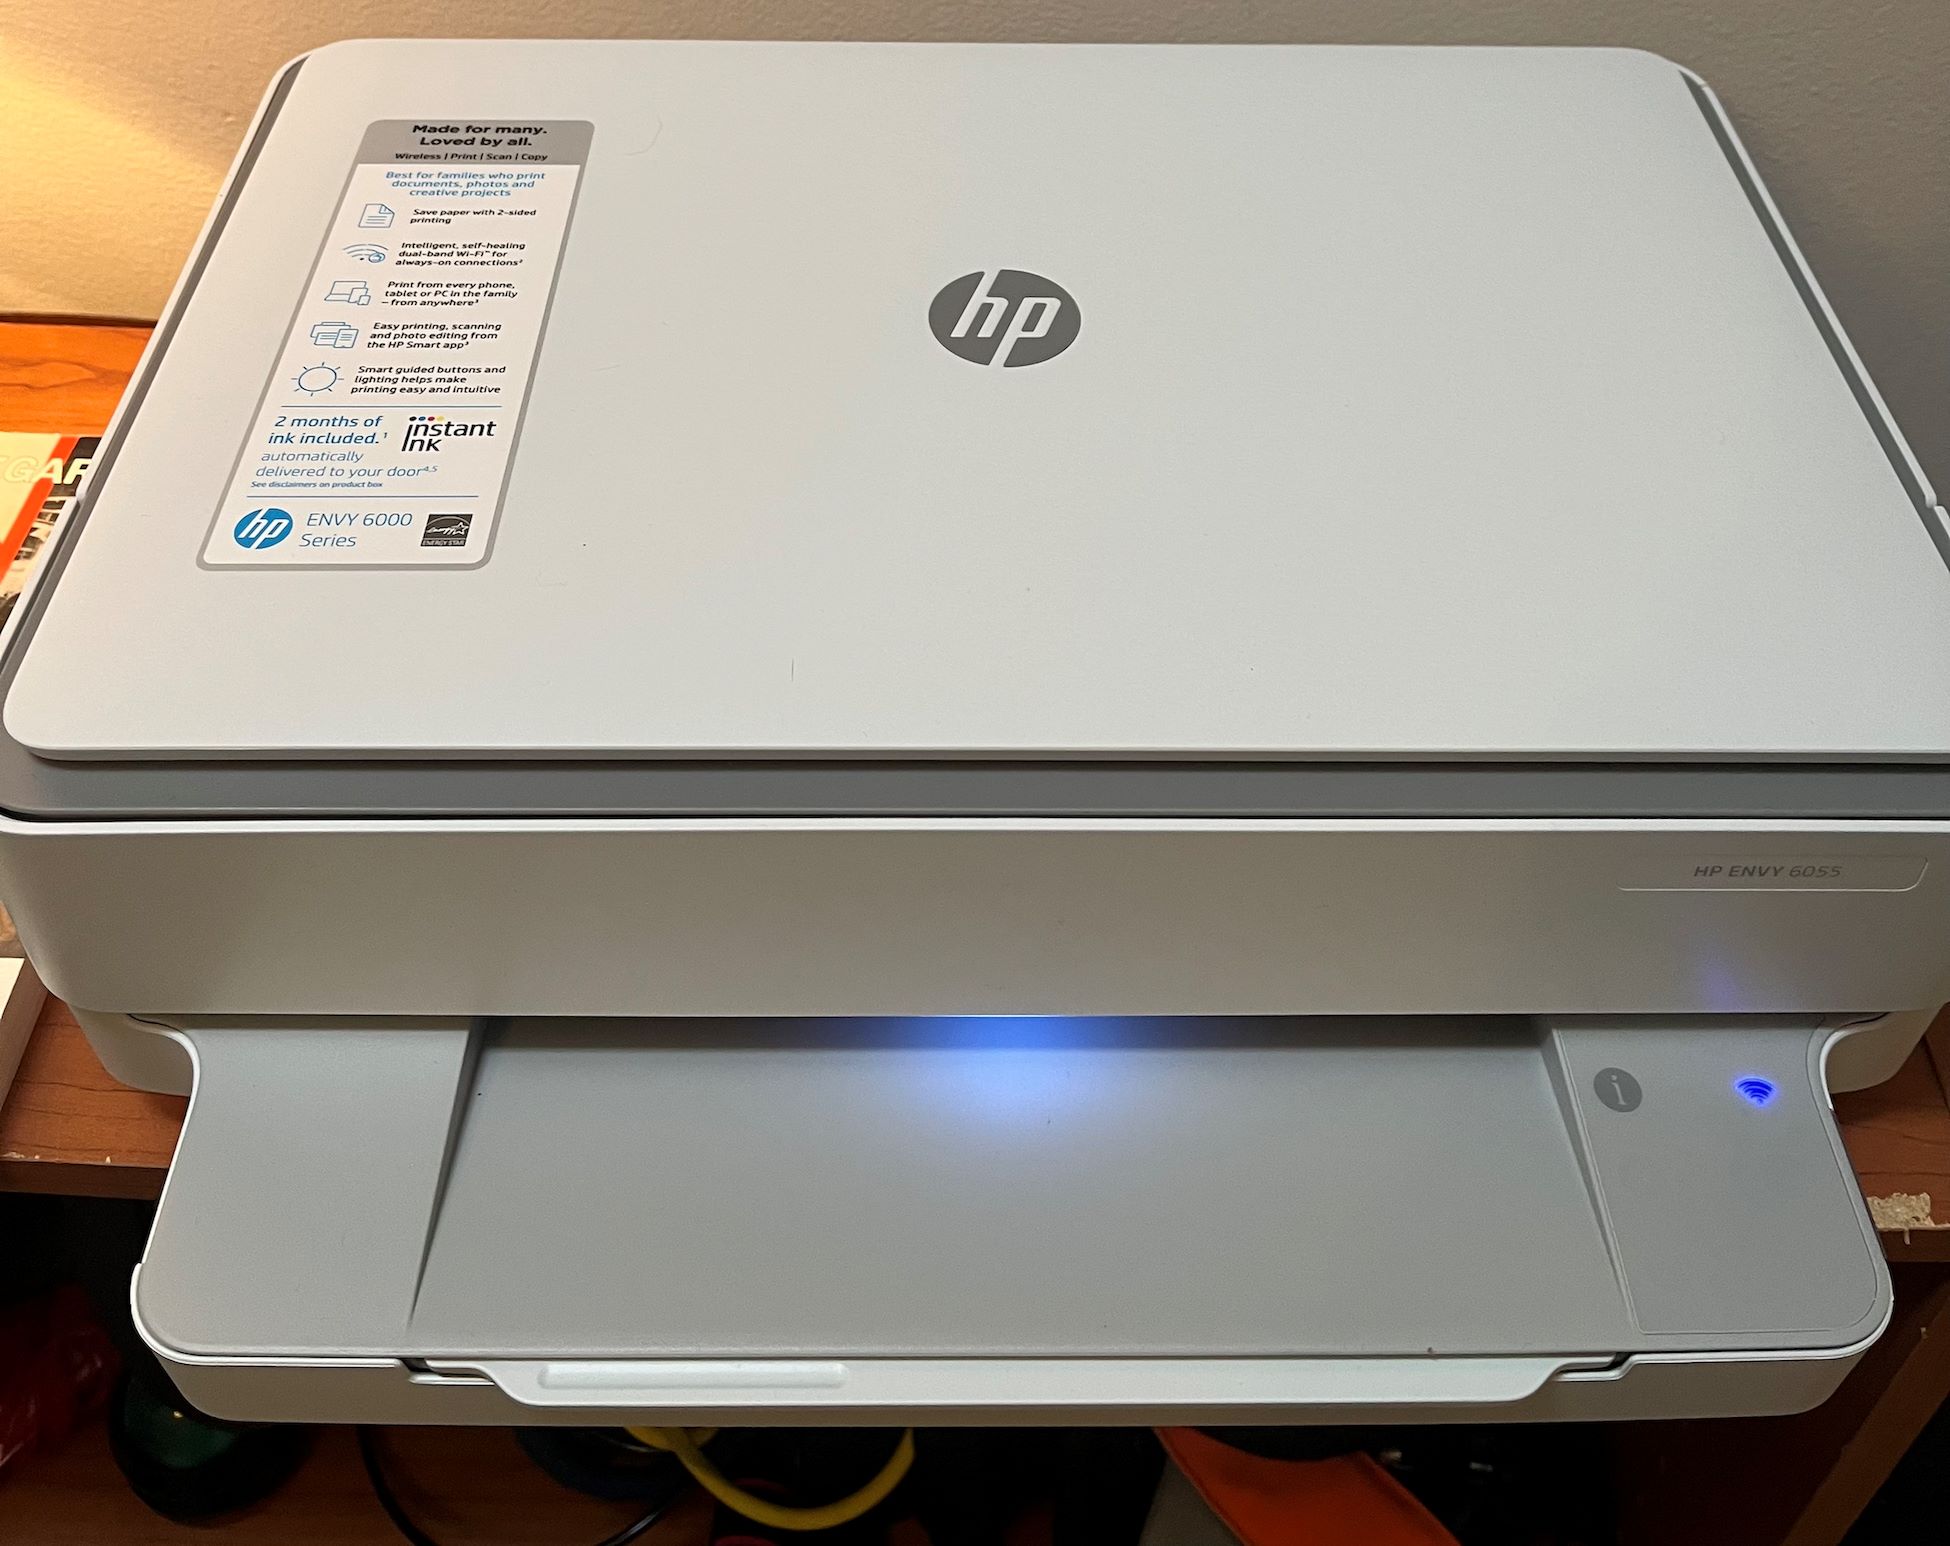 How To Factory Reset A HP Envy 6000 Printer